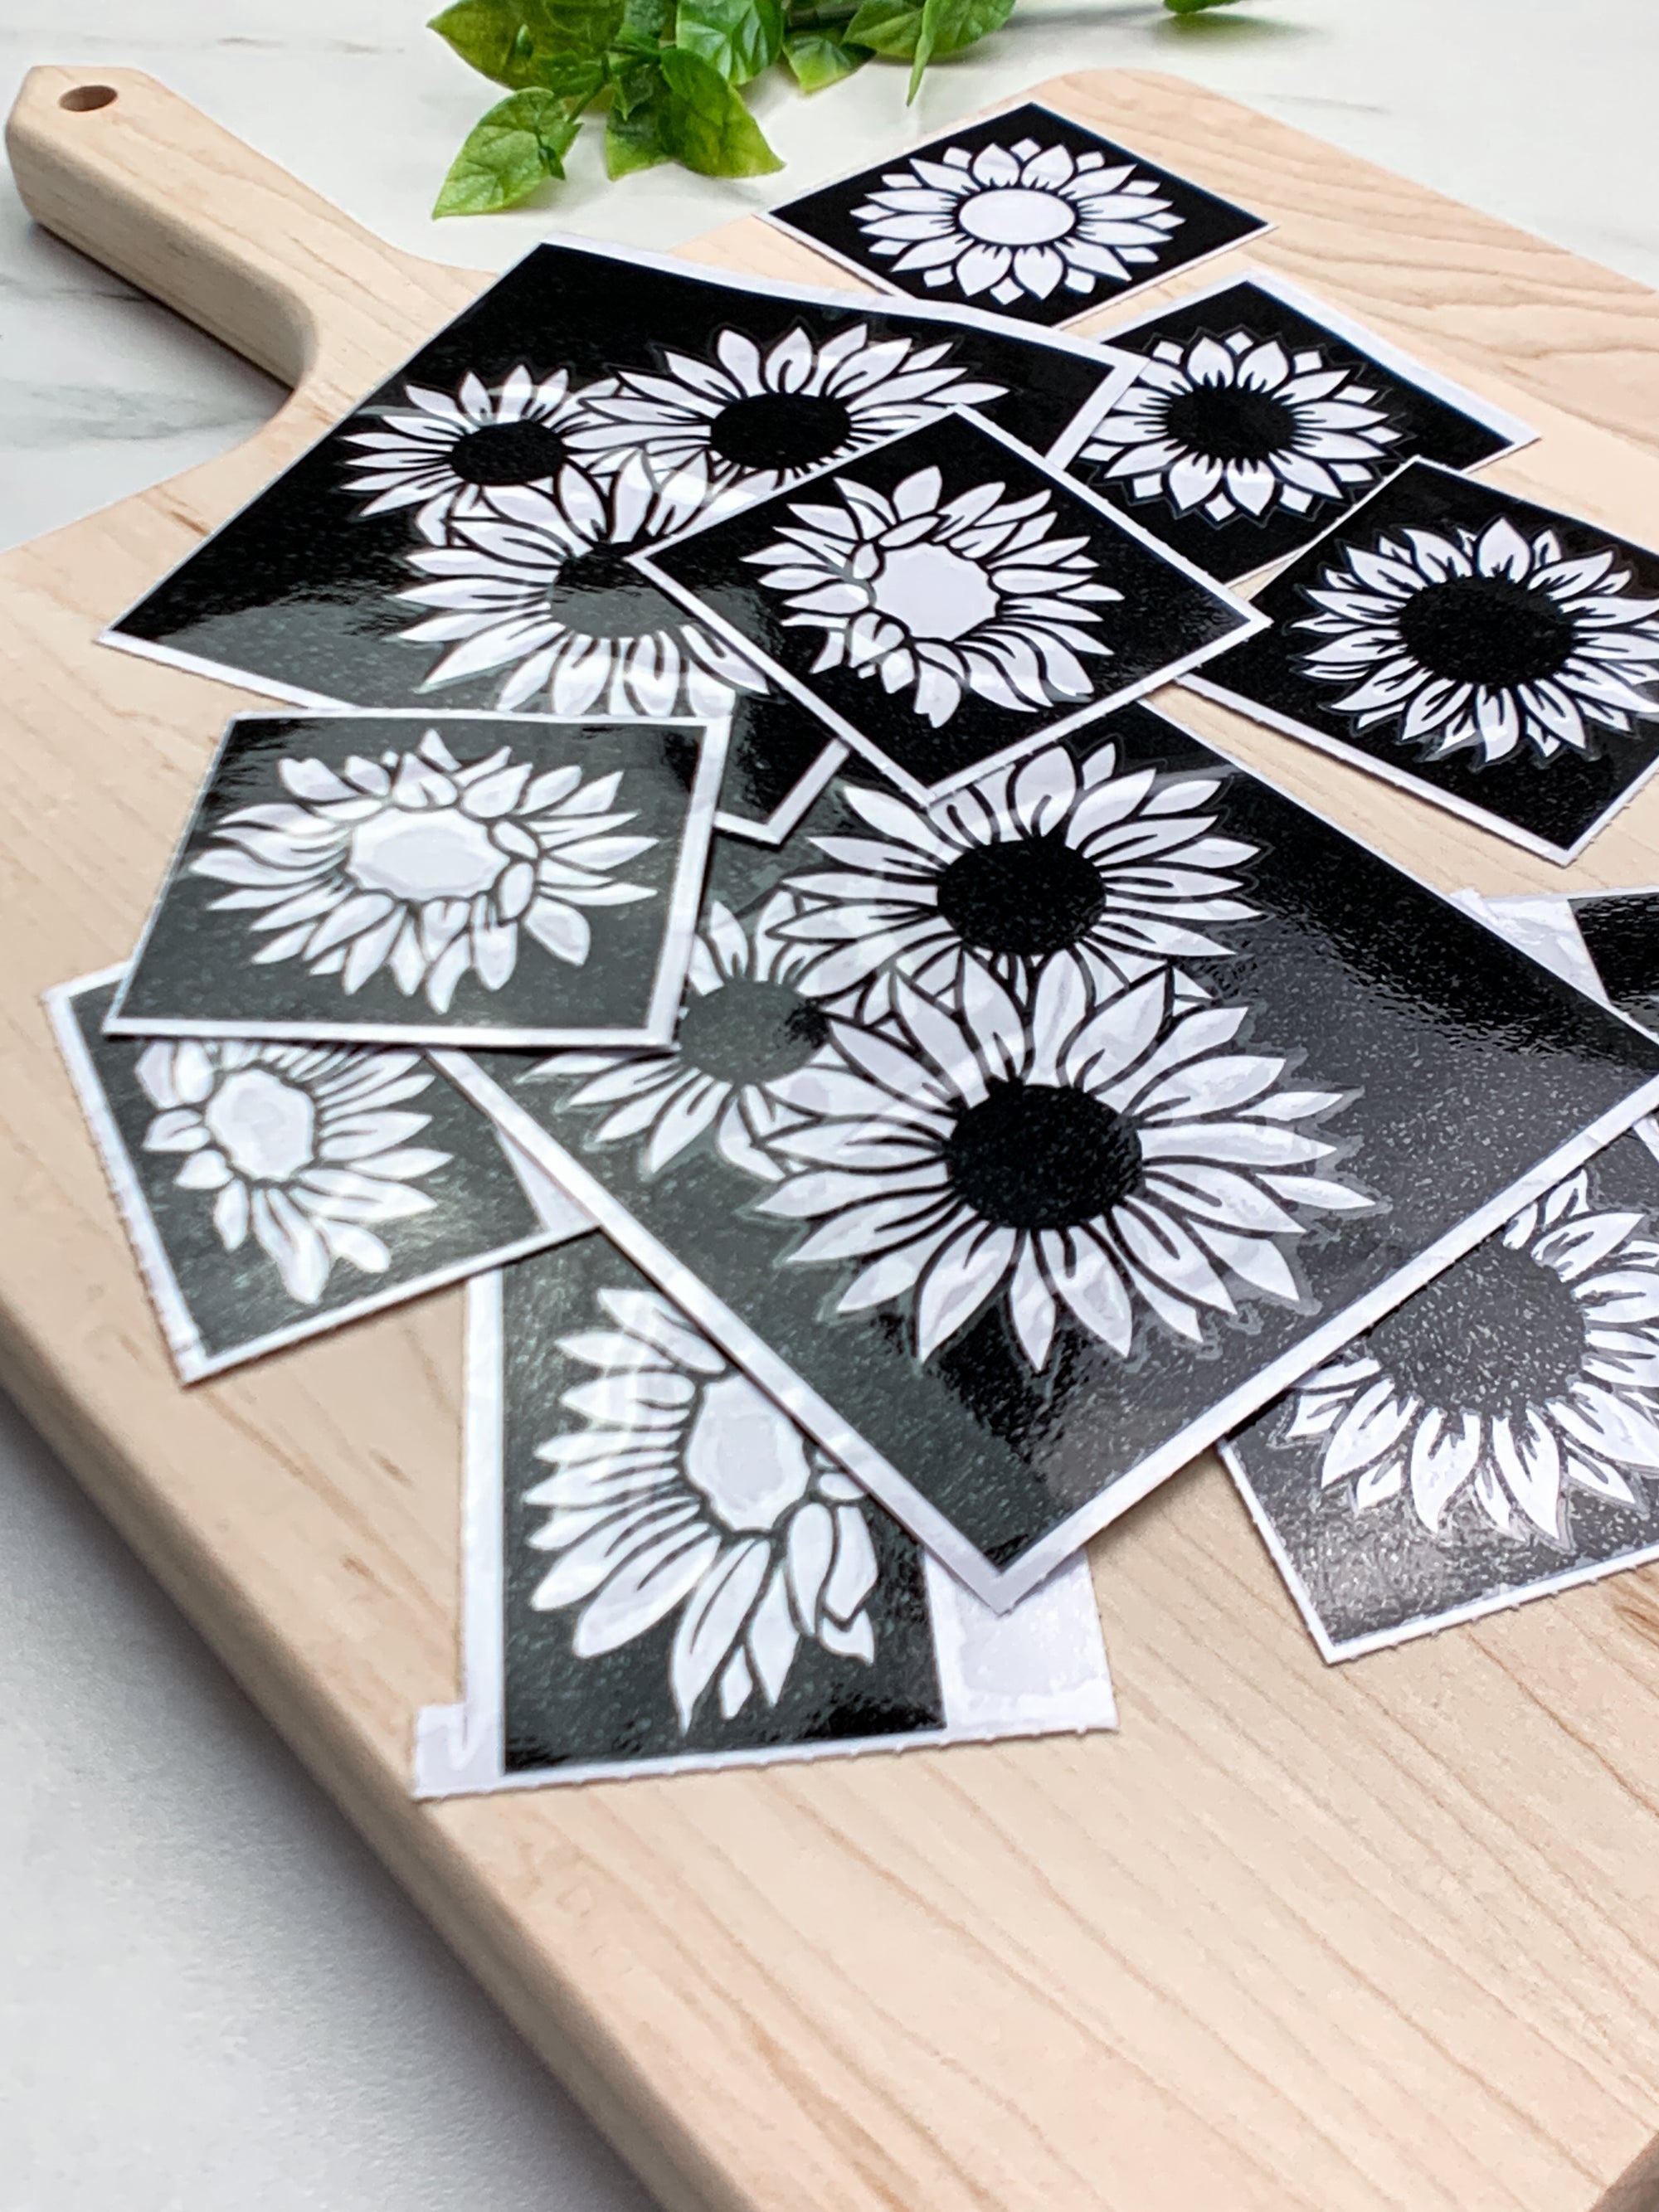 How Using Stencils Can Boost Your Creativity